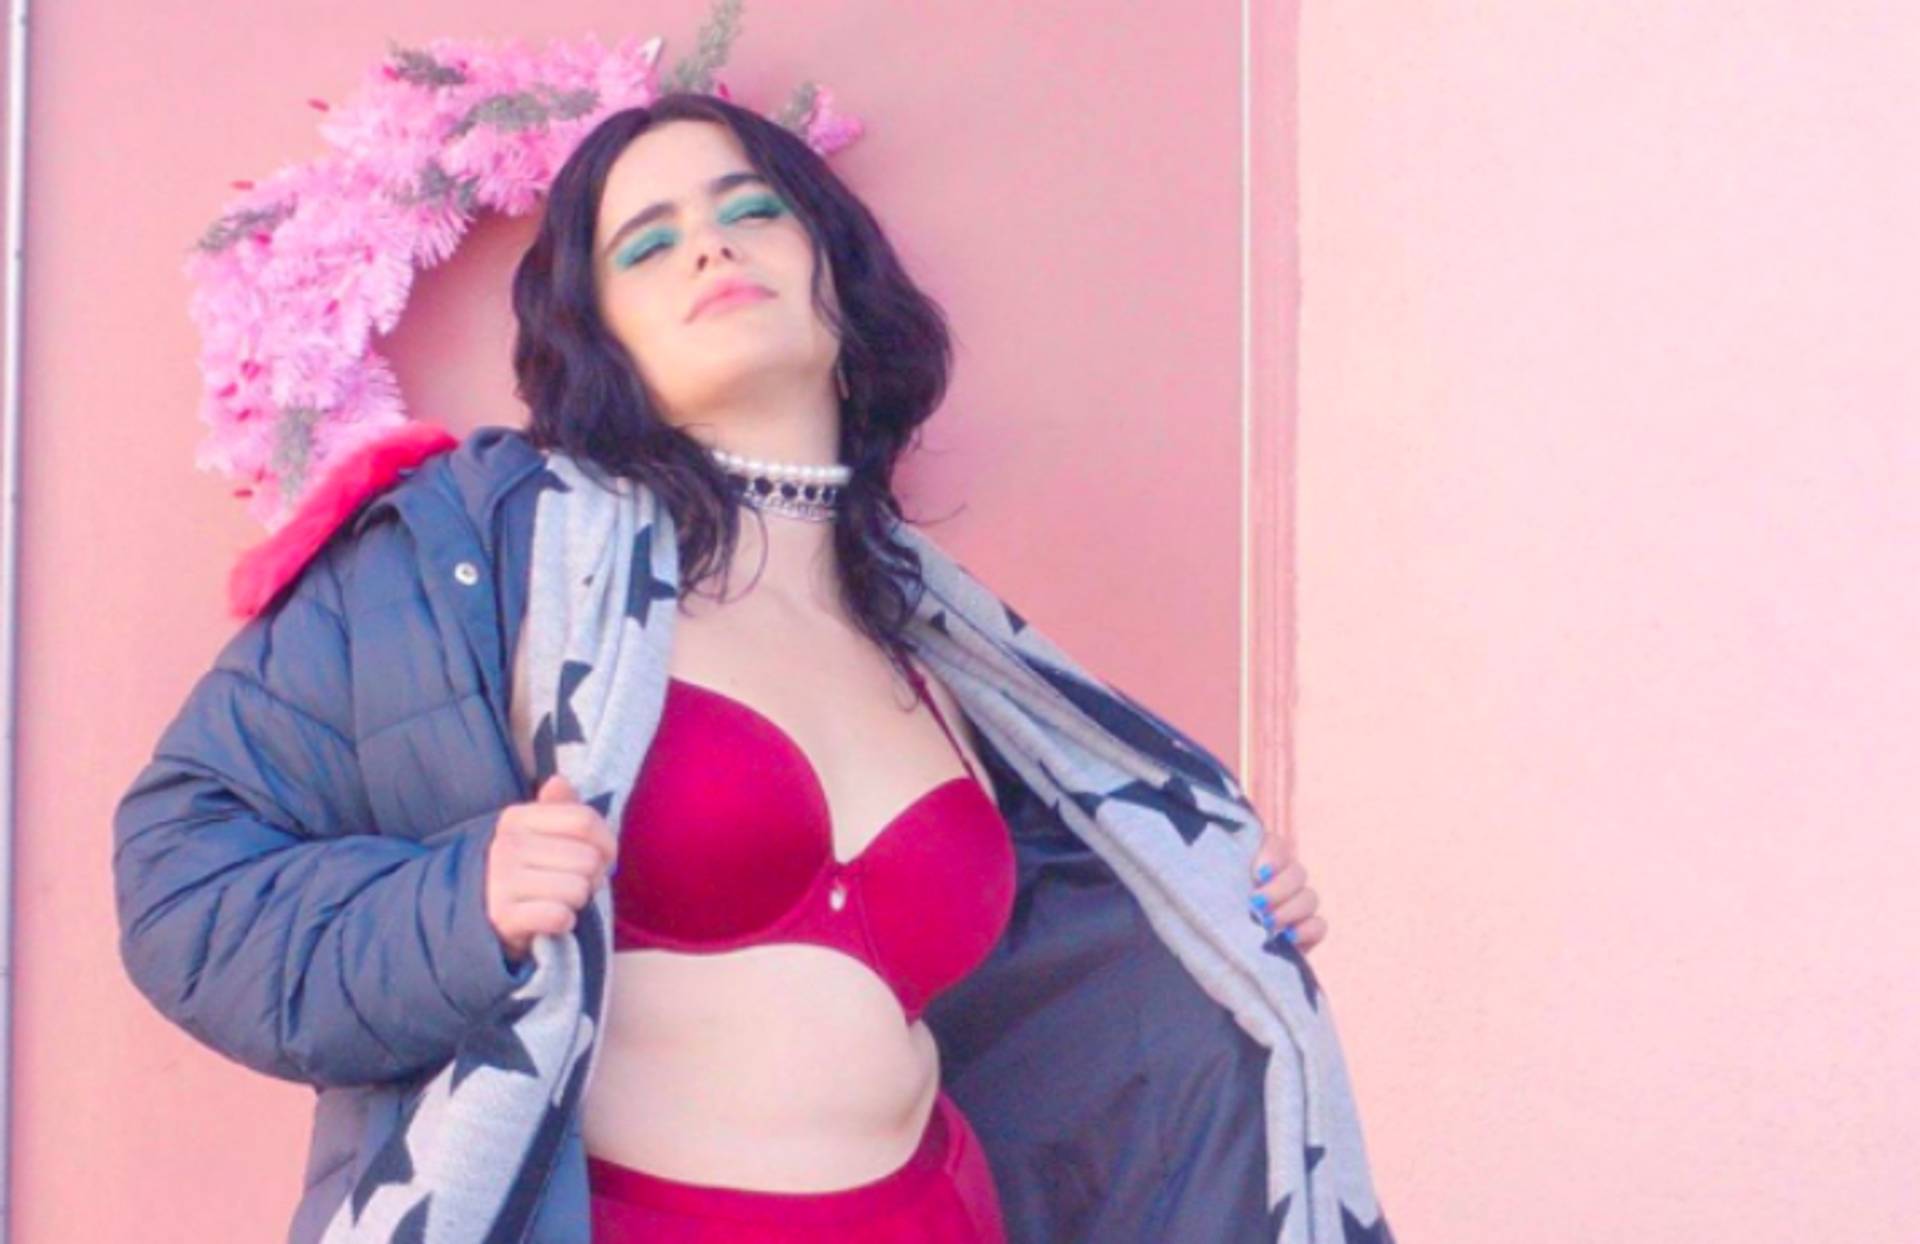 Torrid lingerie ad swaps sexiness for body positivity